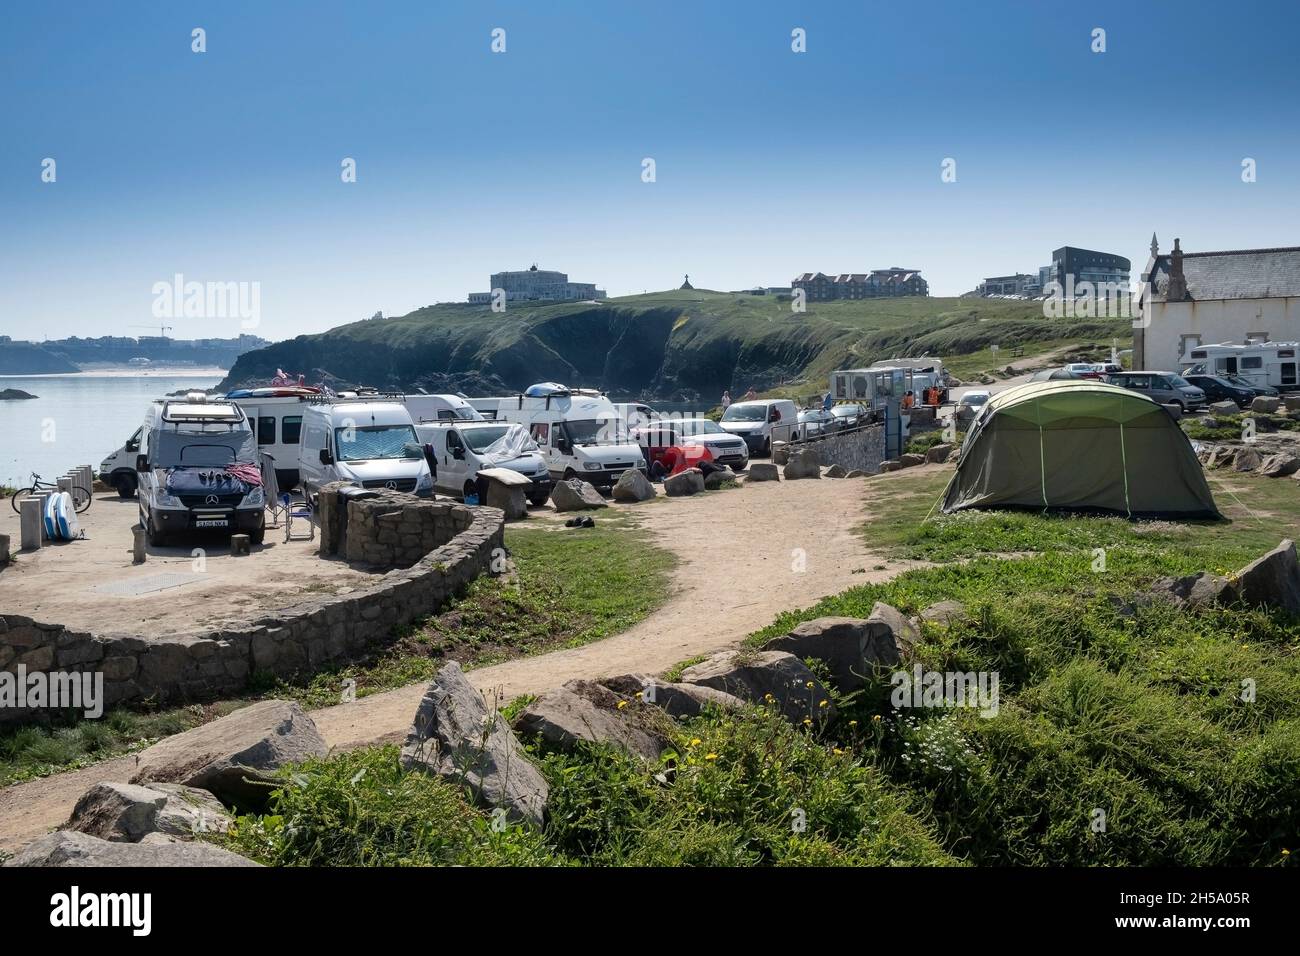 Van lifers and wild campers causing parking problems on Towan Head in Newquay in Cornwall. Stock Photo